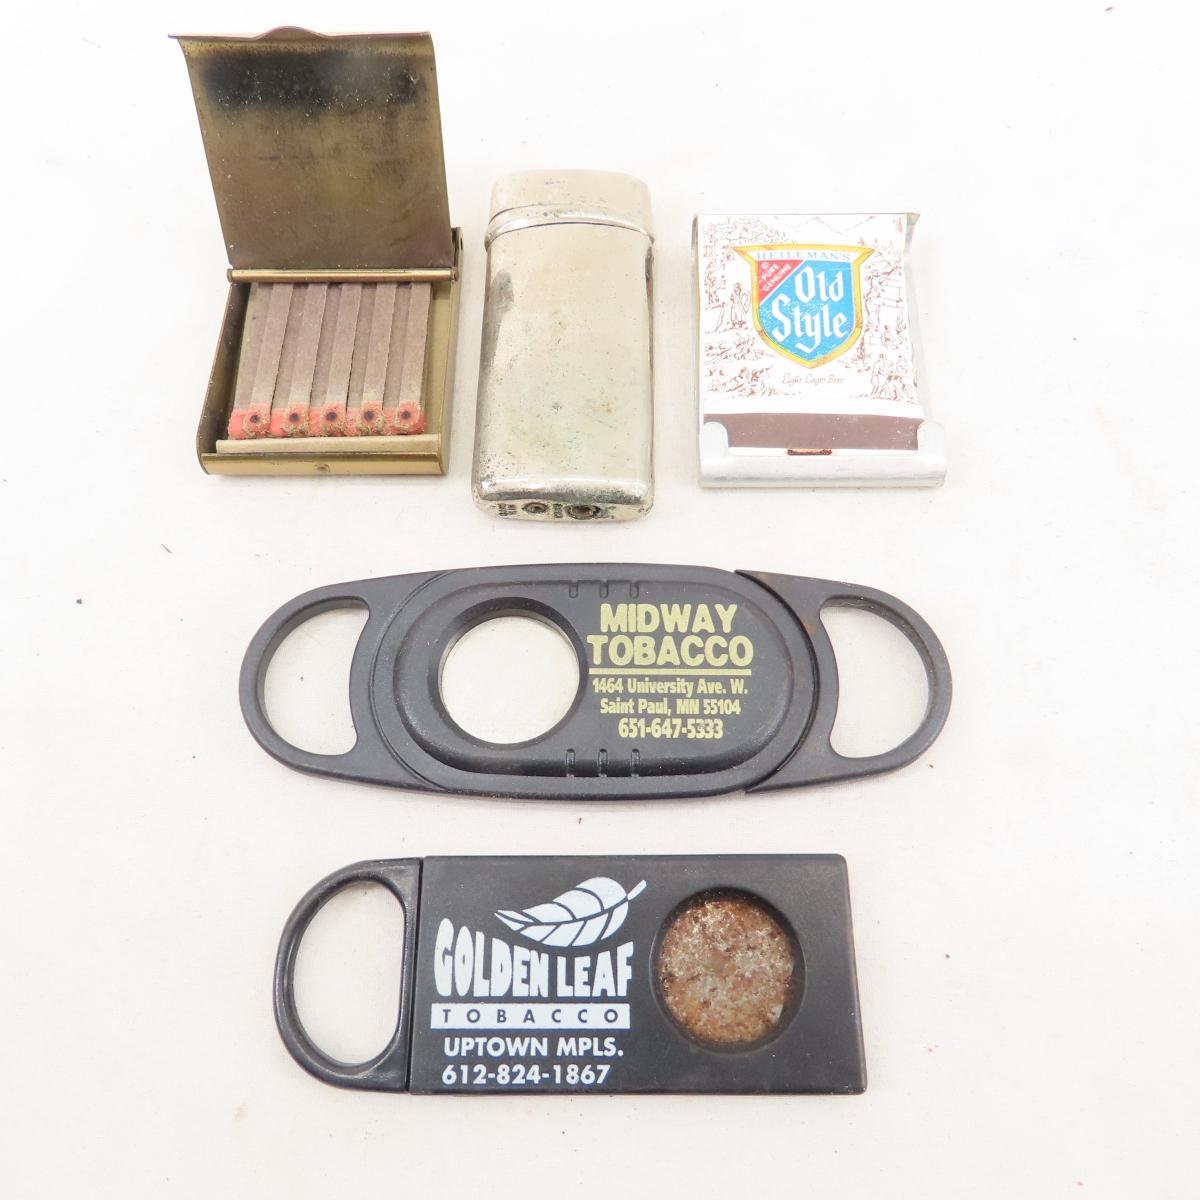 Pipes, Matchbook collection and accessories